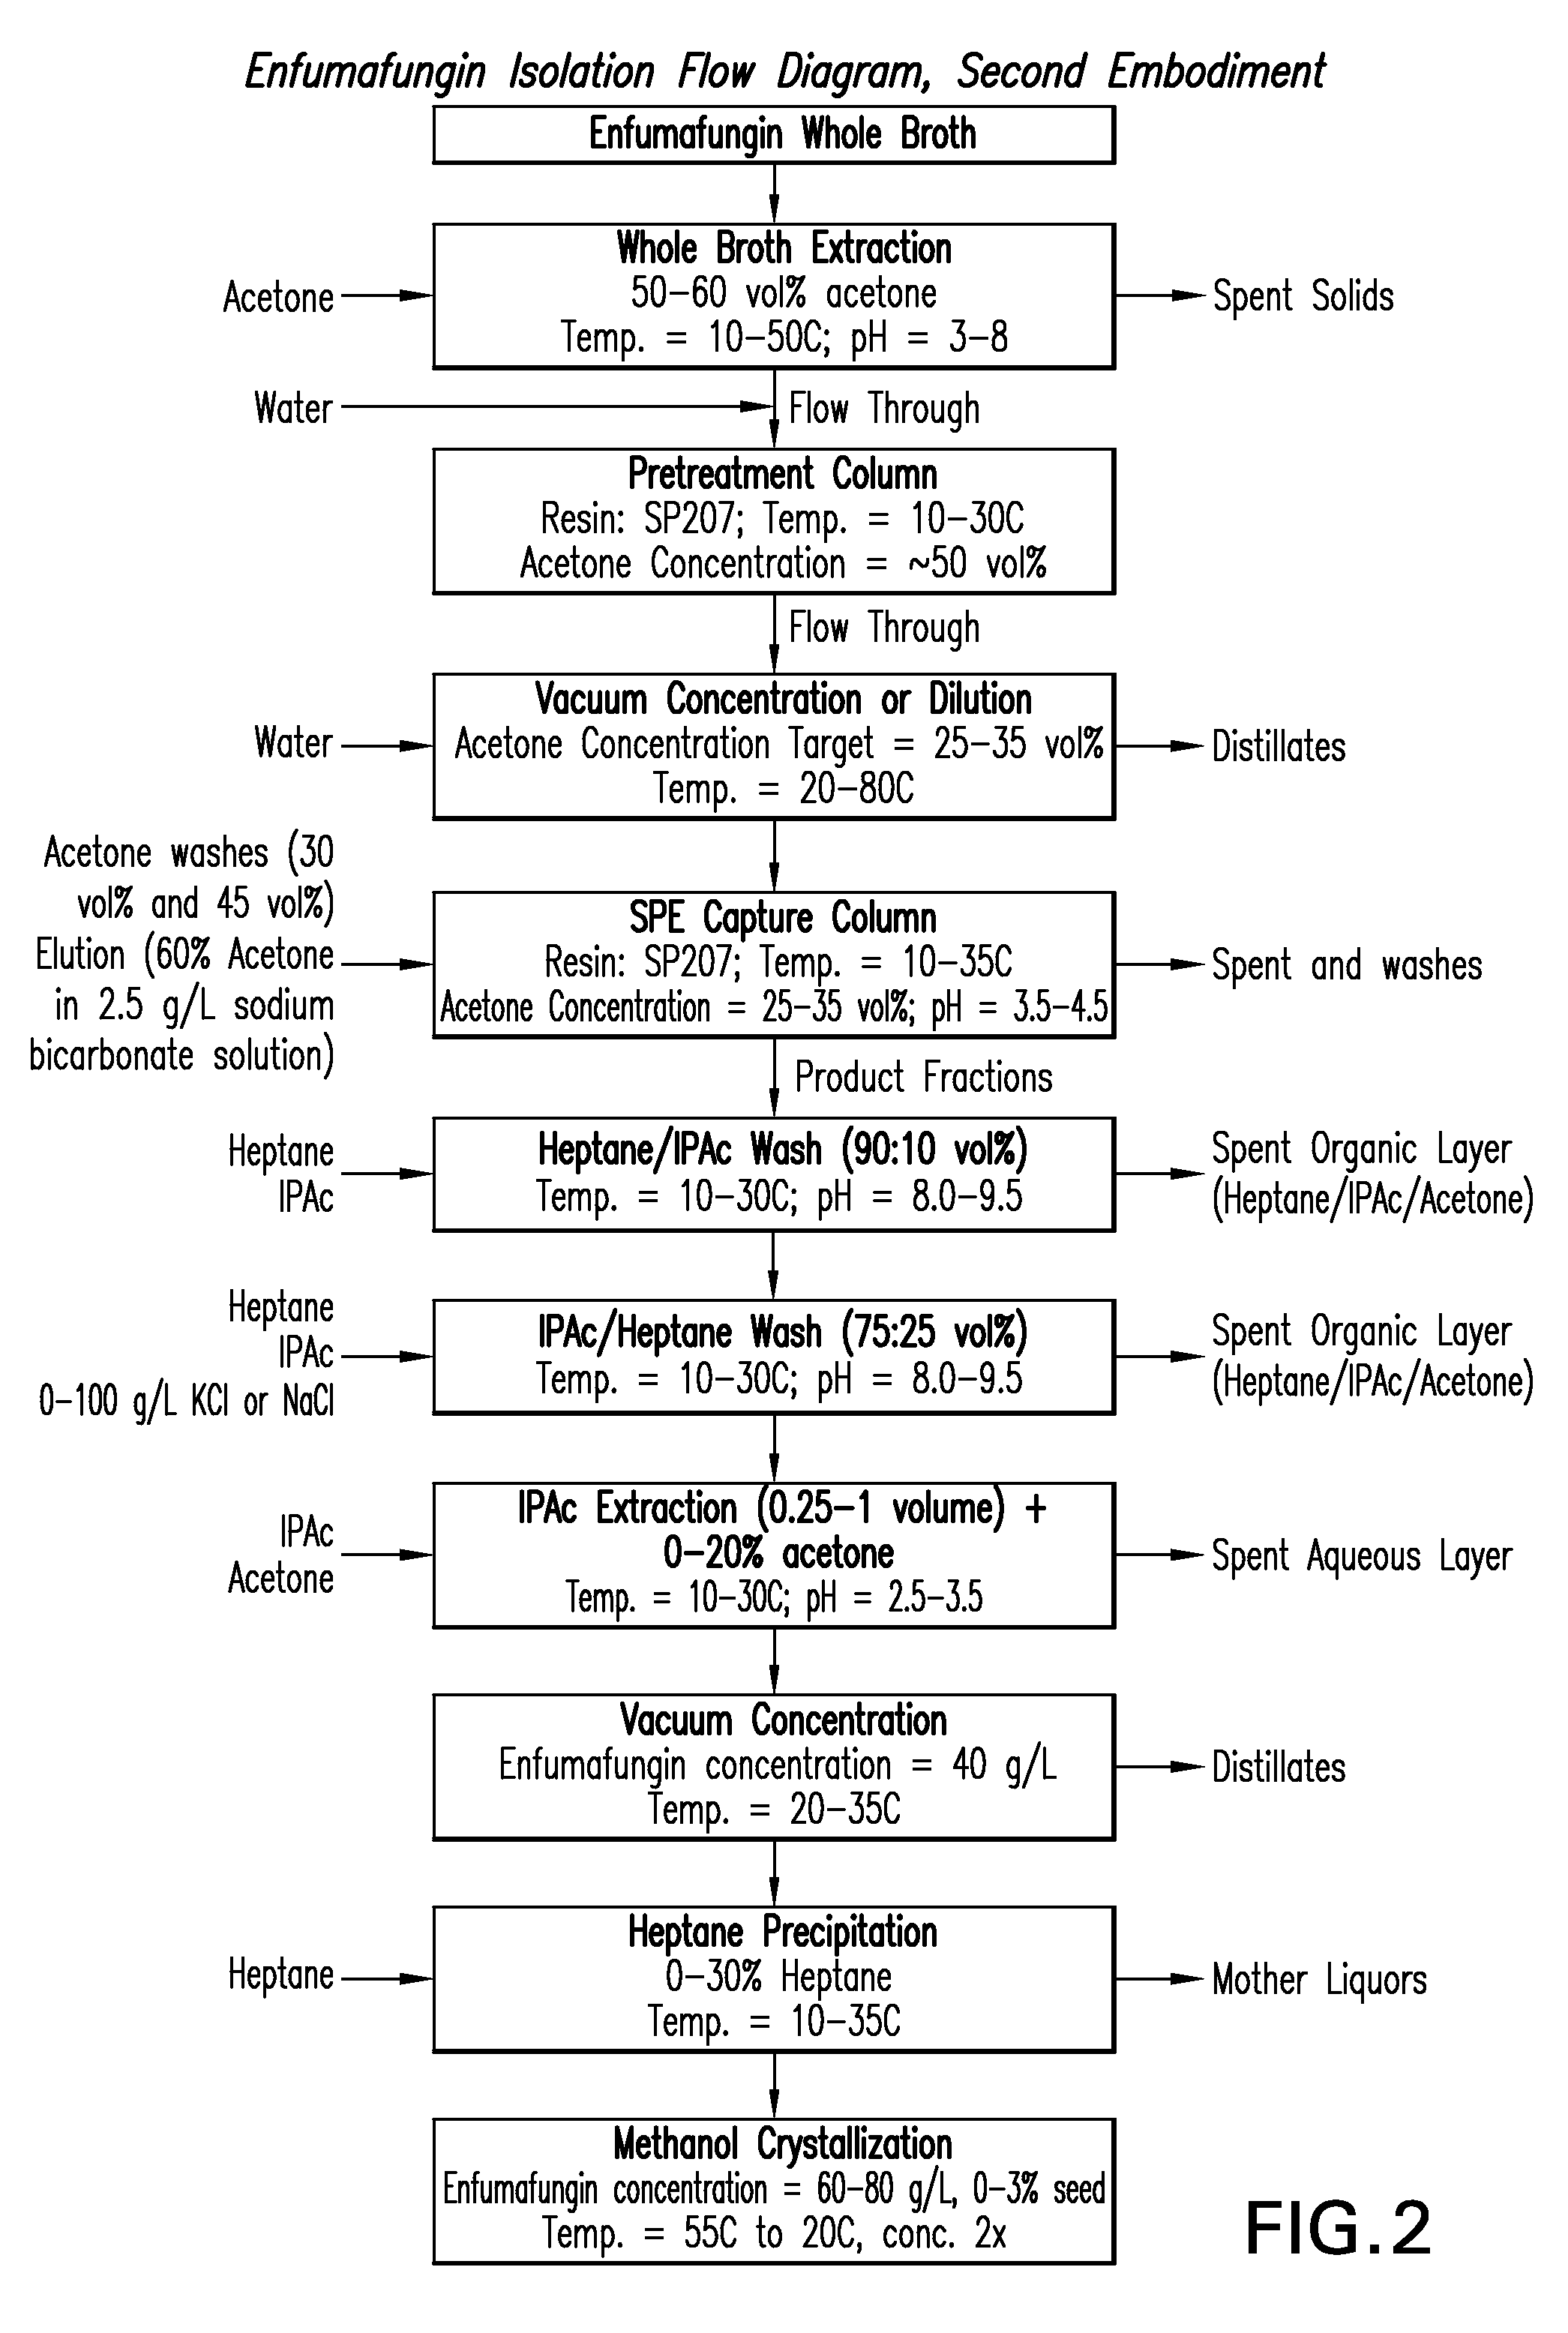 Processes for isolation and purification of enfumafungin